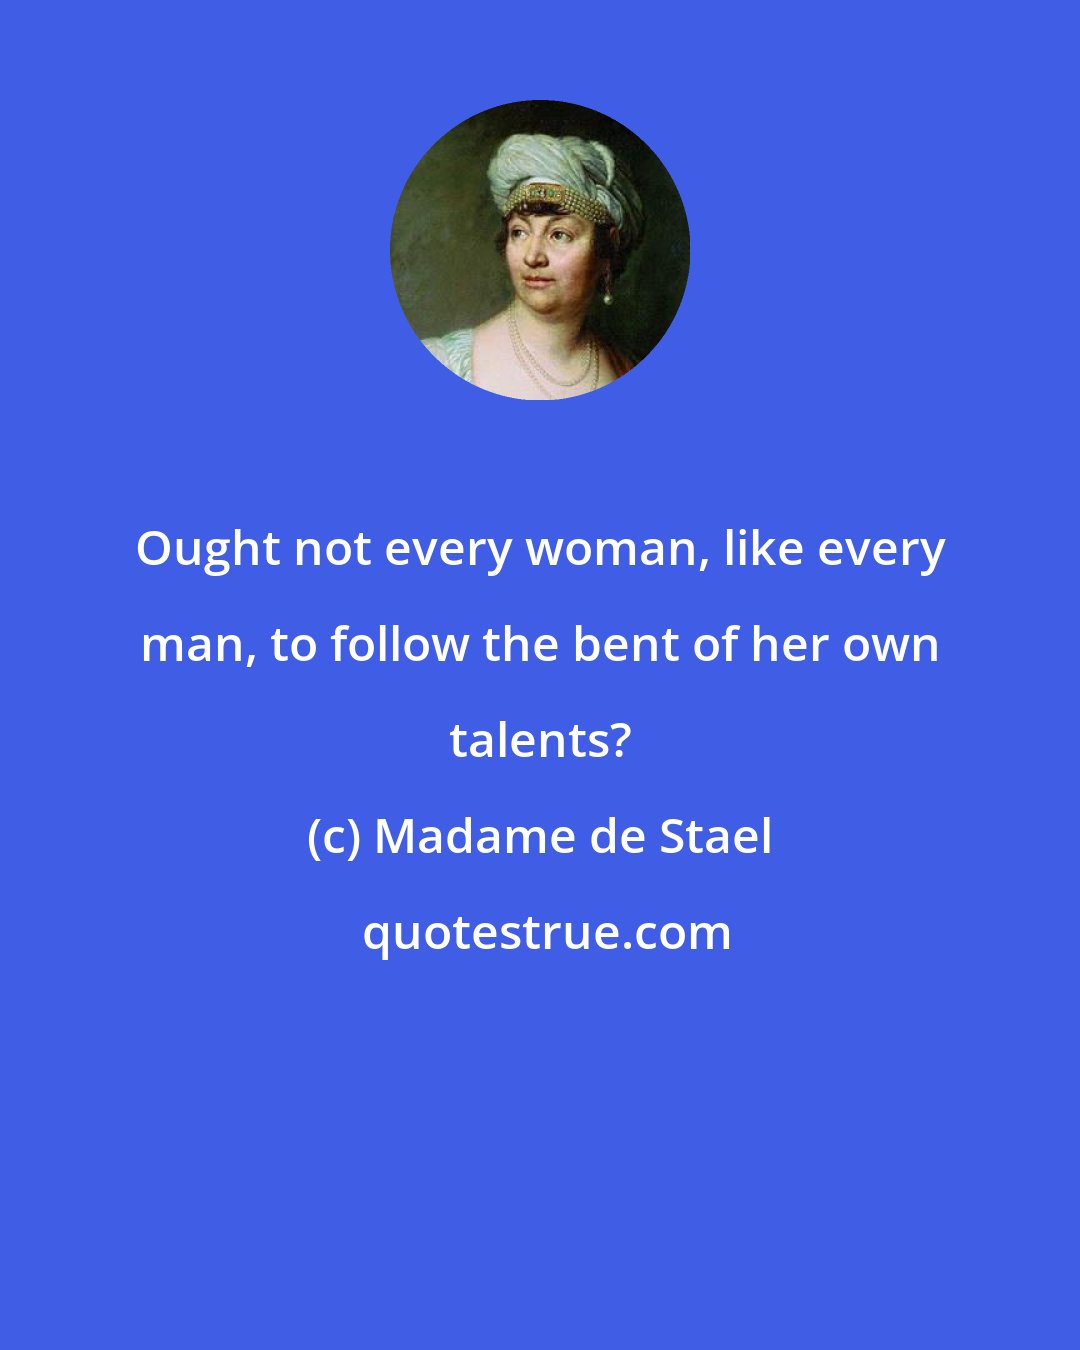 Madame de Stael: Ought not every woman, like every man, to follow the bent of her own talents?